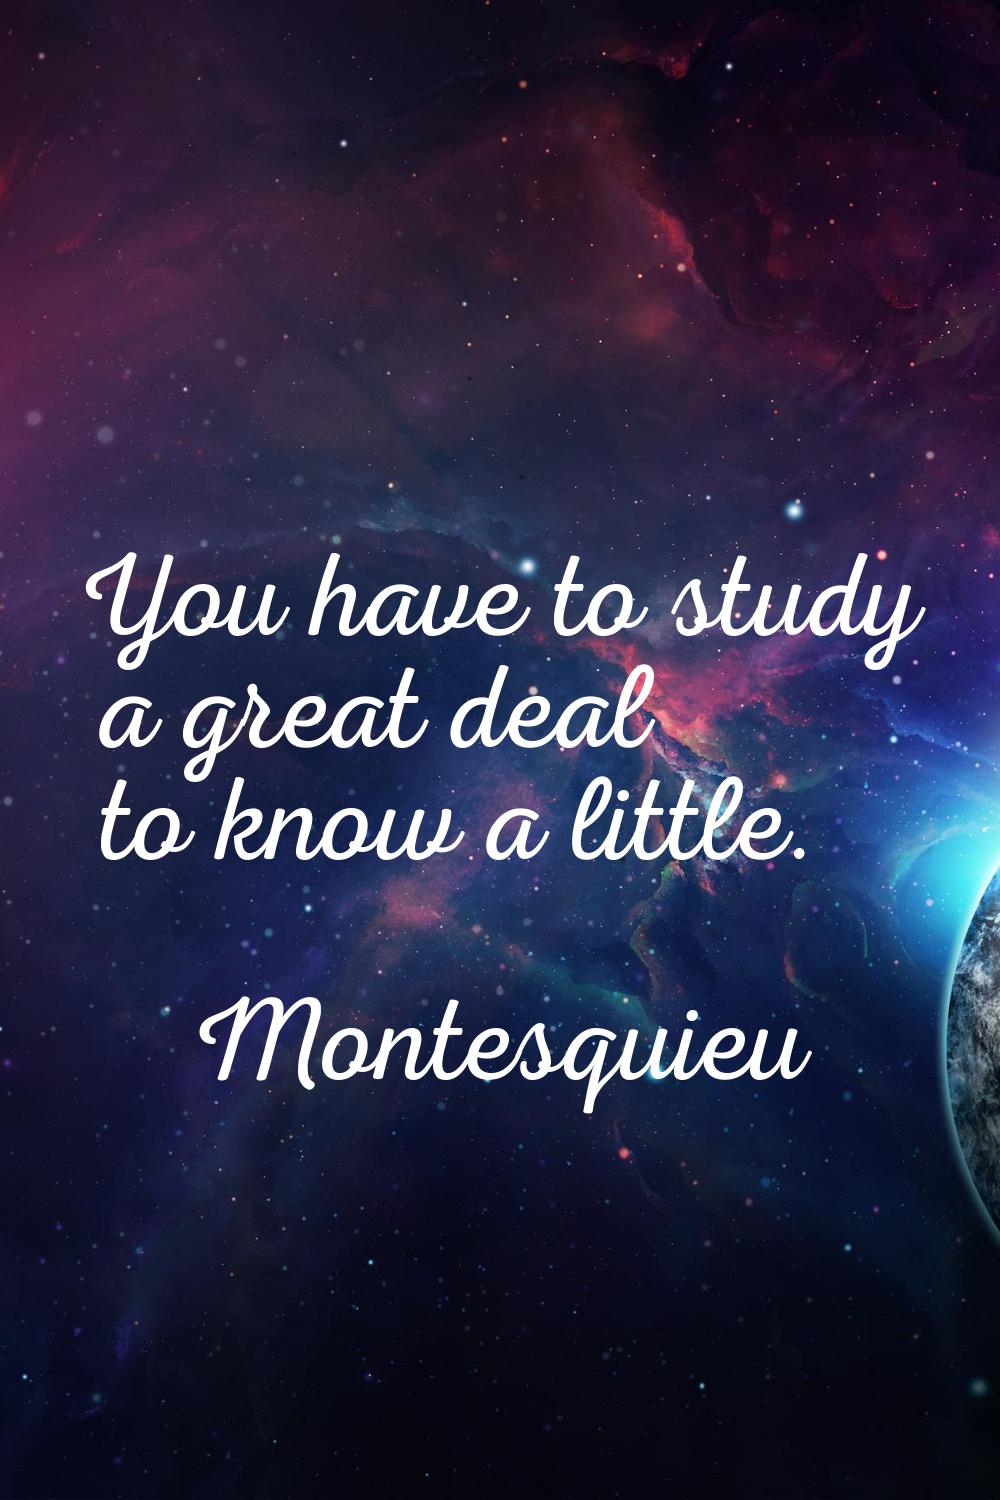 You have to study a great deal to know a little.